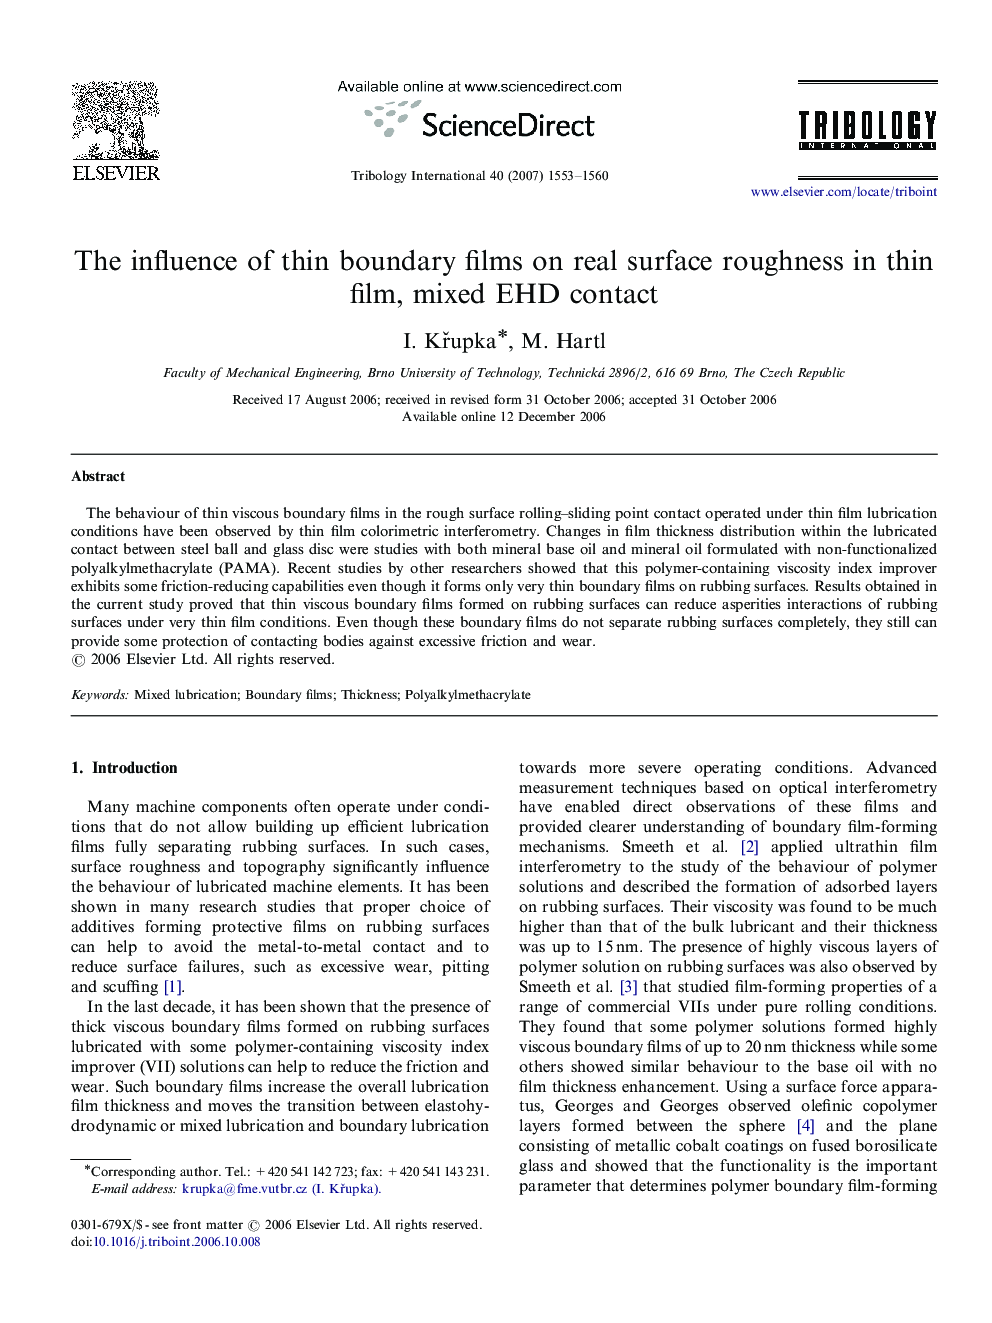 The influence of thin boundary films on real surface roughness in thin film, mixed EHD contact